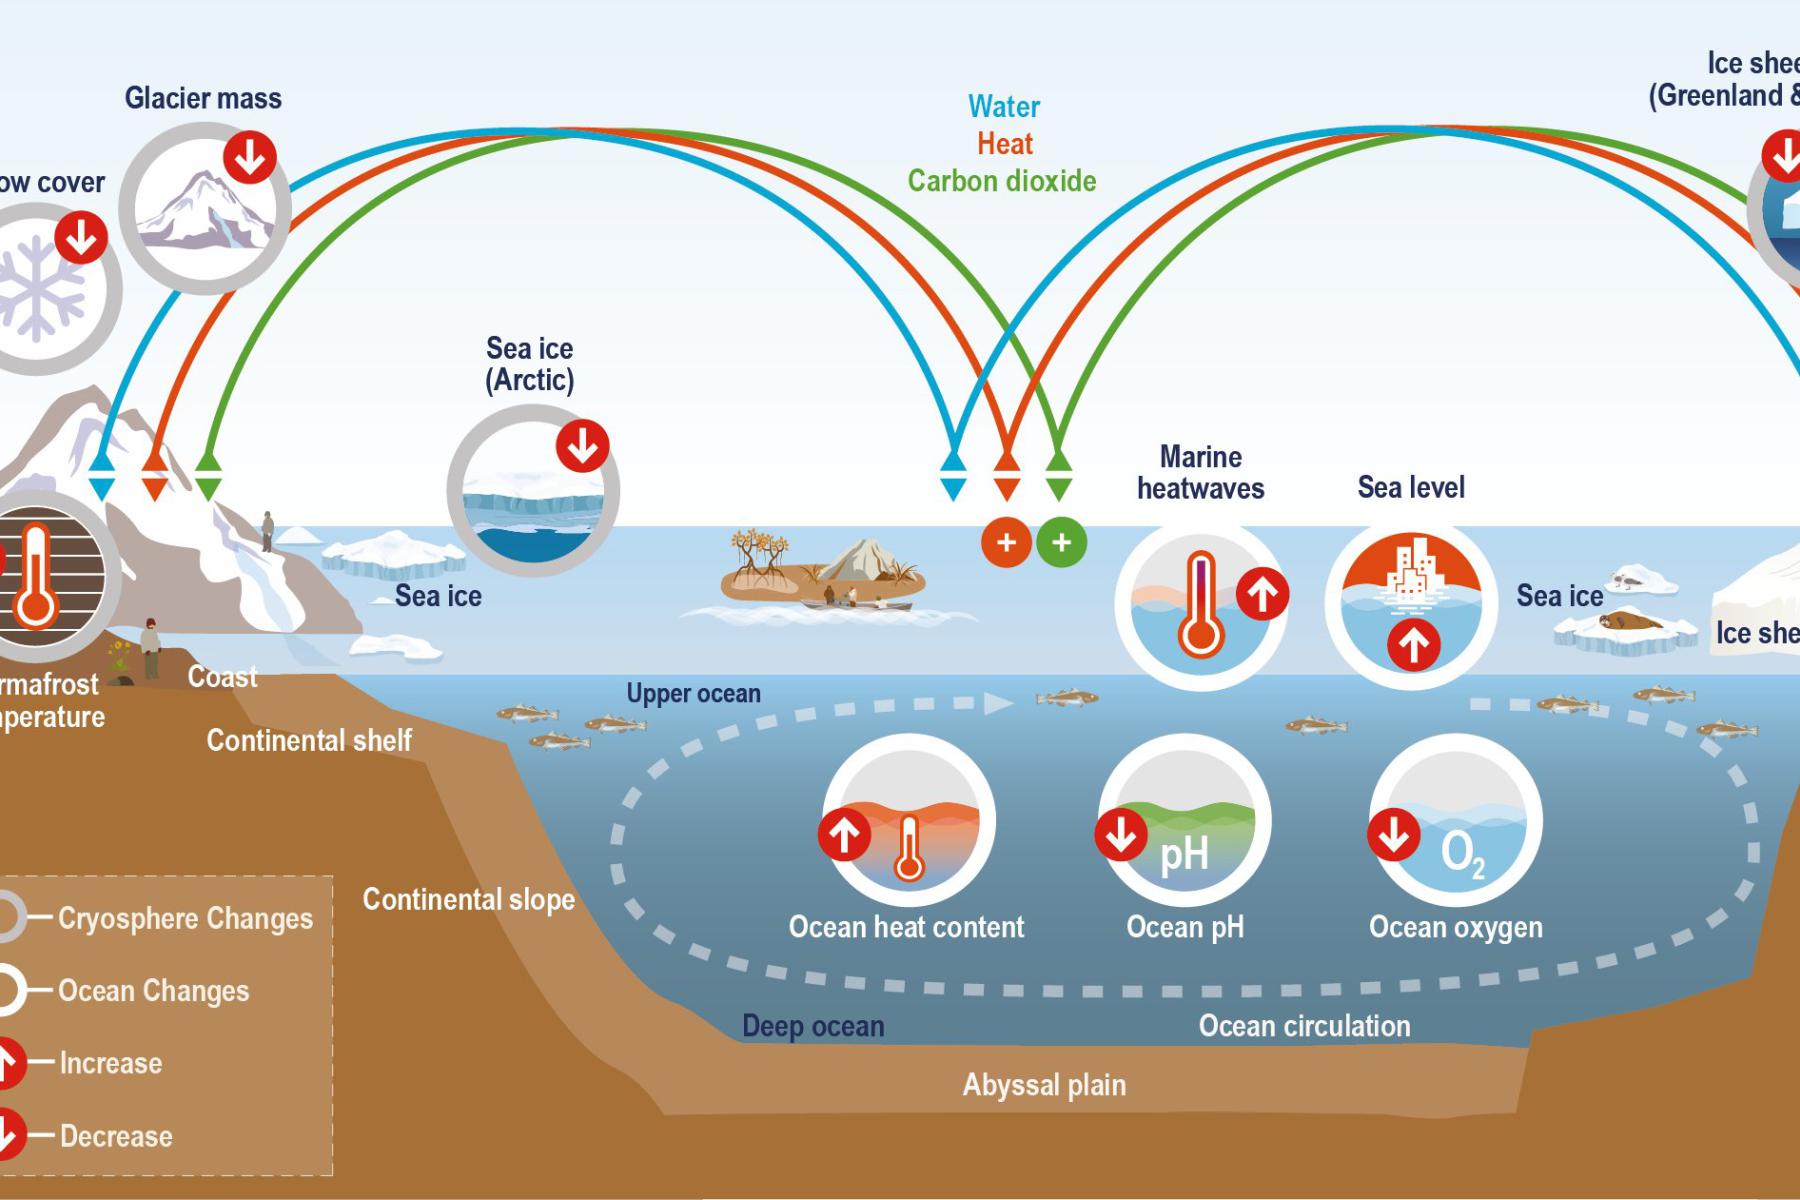 Schematic illustration of key components and changes of the ocean and cryosphere, and their linkages in the Earth system through the global exchange of heat, water, and carbon. ©IPCC (2019) Technical Summary (Pörtner H-O et al.)